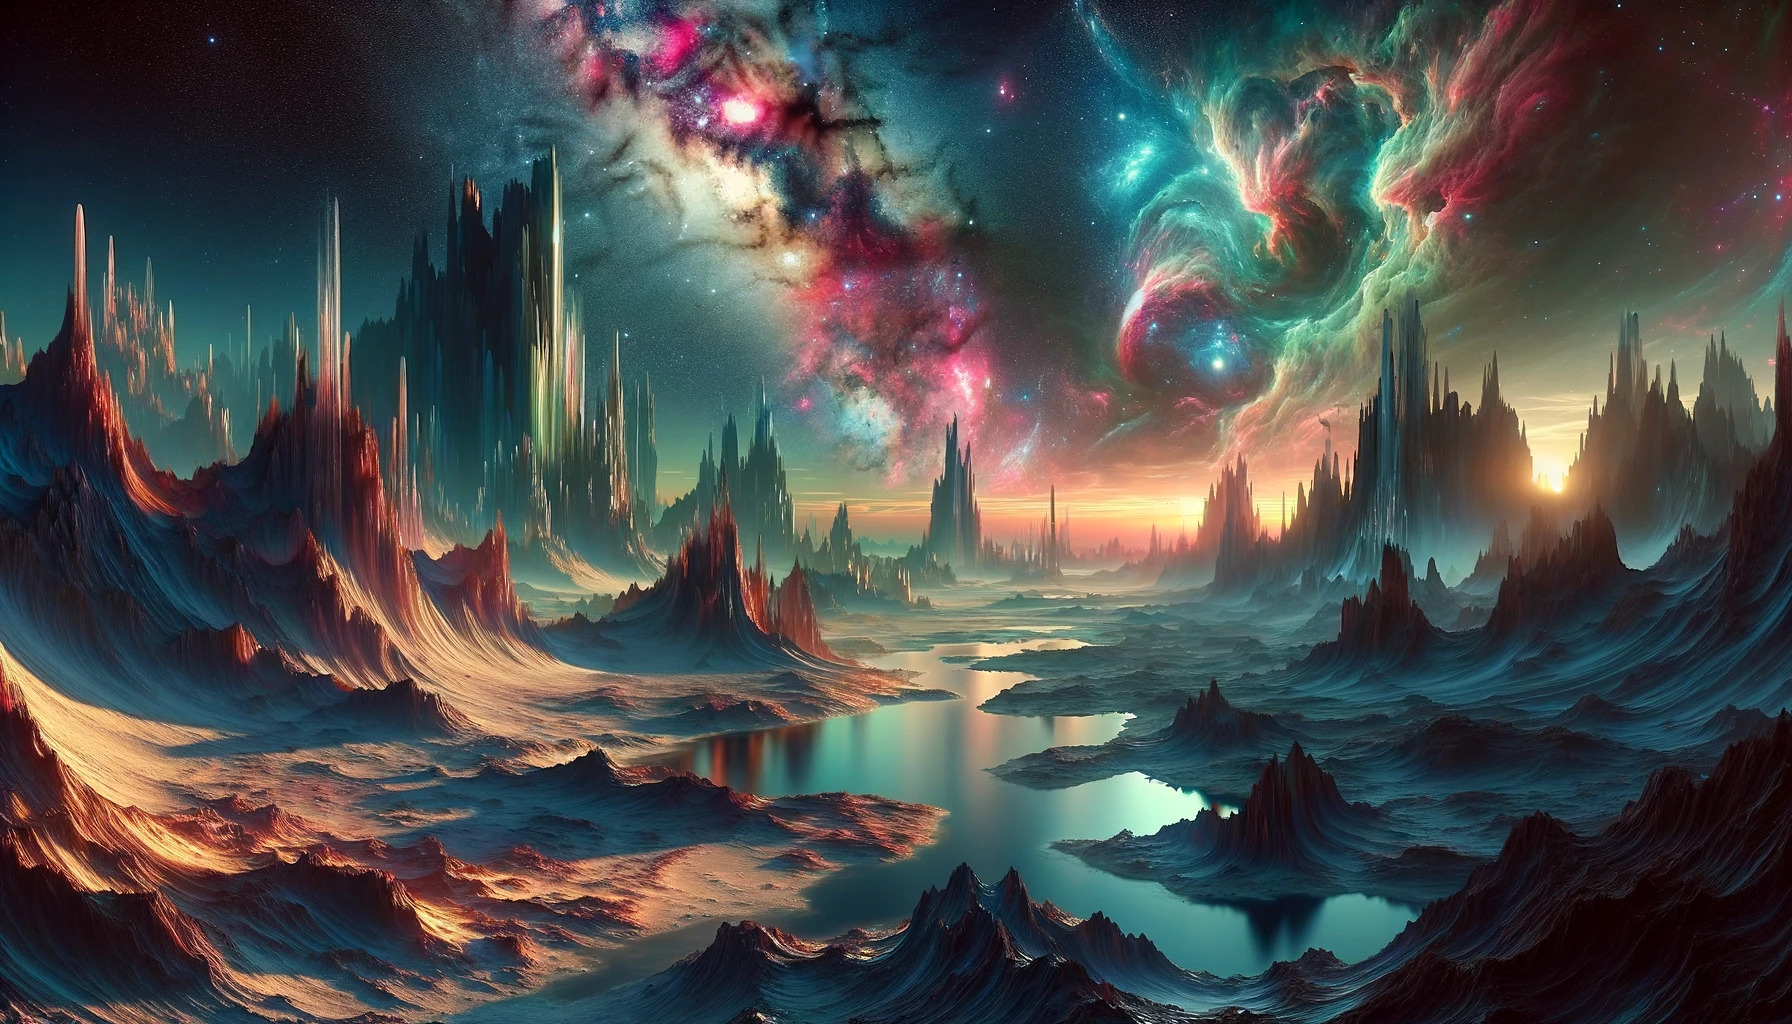 a cinematic image inspired by the concept of an uncharted planet. This artwork invites you into an imaginative world far beyond our own, where the surreal landscape and cosmic wonders merge to evoke a sense of awe and exploration. (Planet Name Generator)